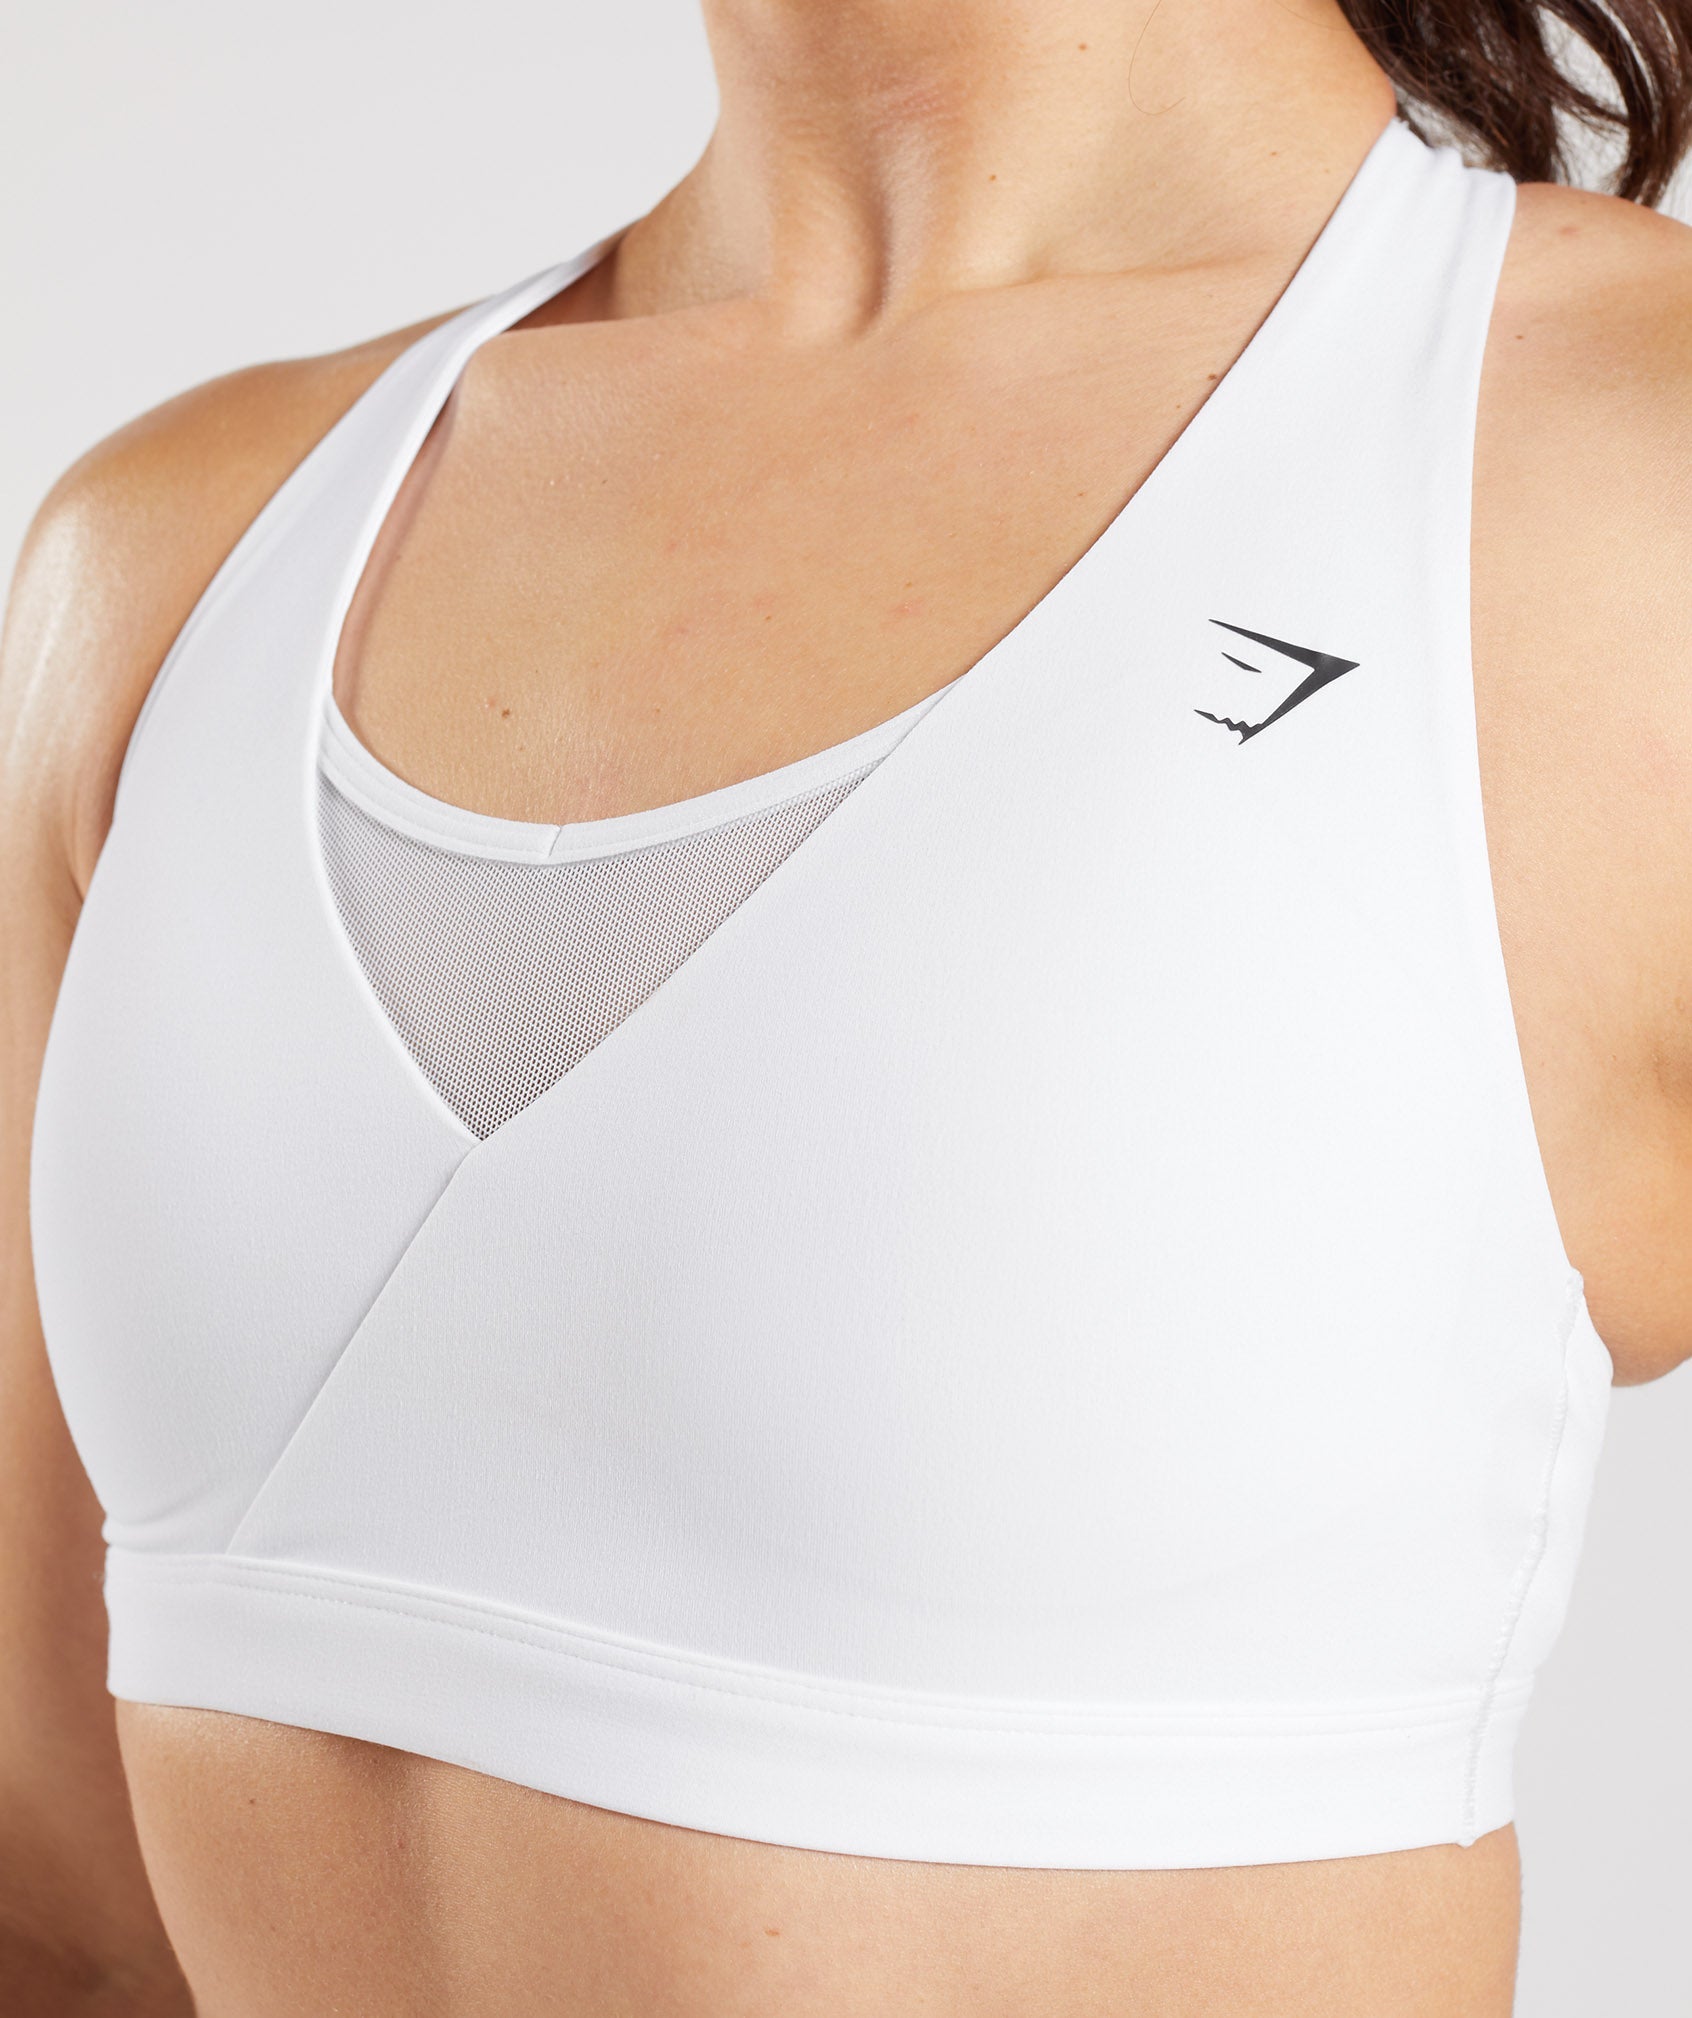 Crossover Sports Bra in White - view 6